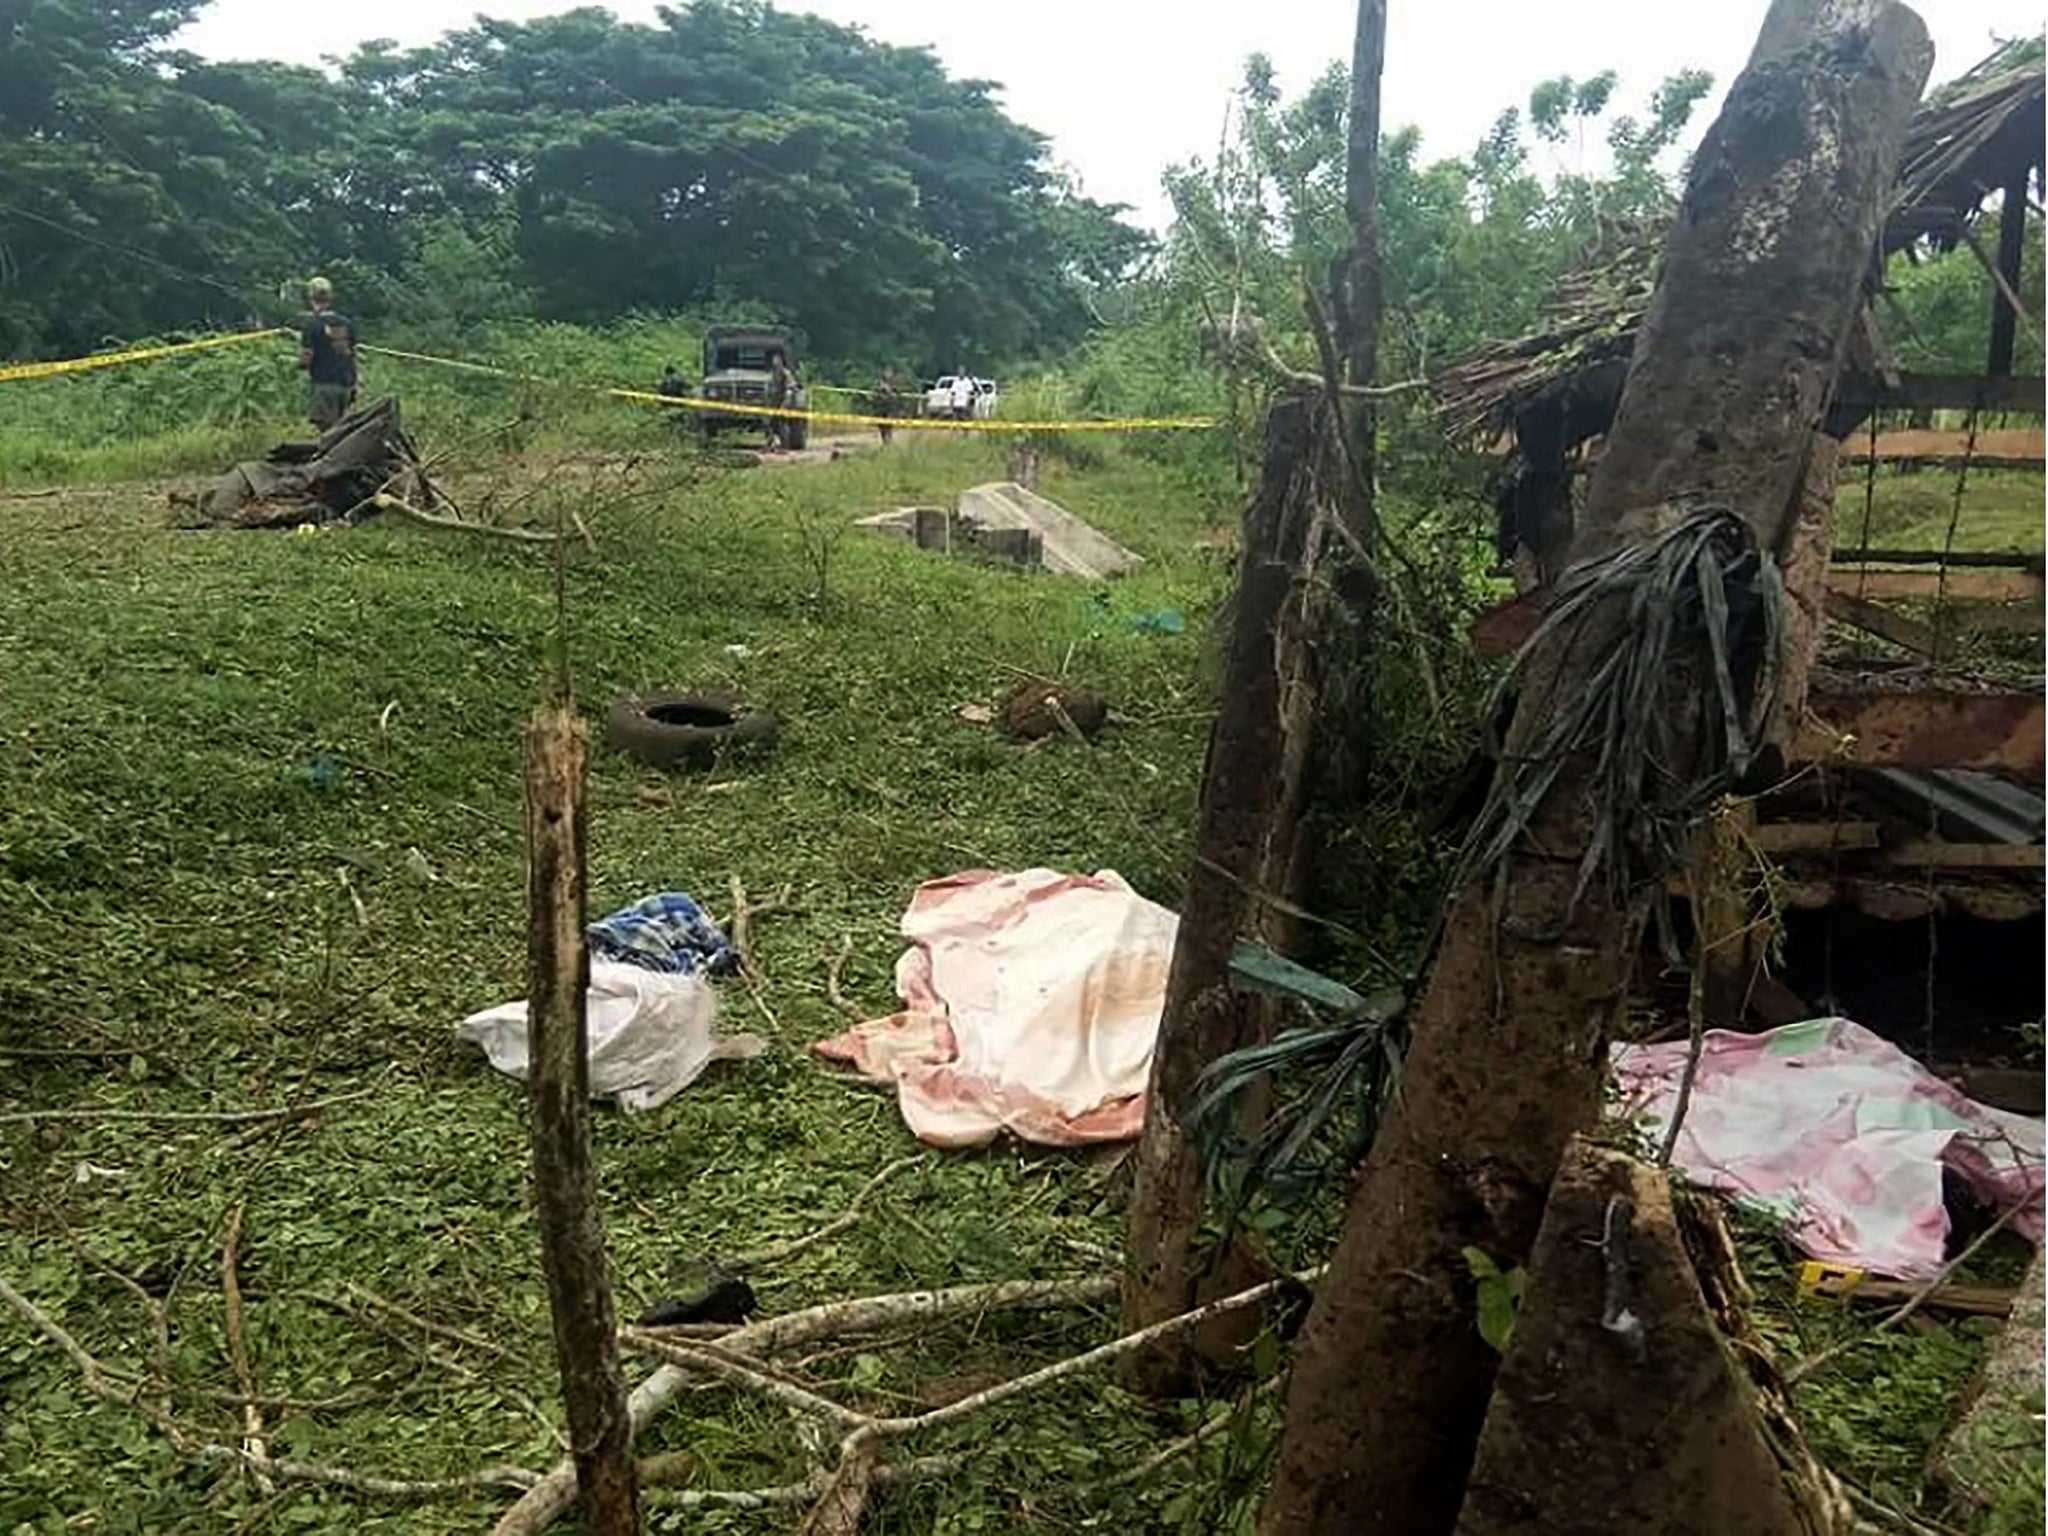 Three unidentified bodies are covered with cloth at the site of the explosion in Lamitan, Basilan province, southern Philippines, on Tuesday